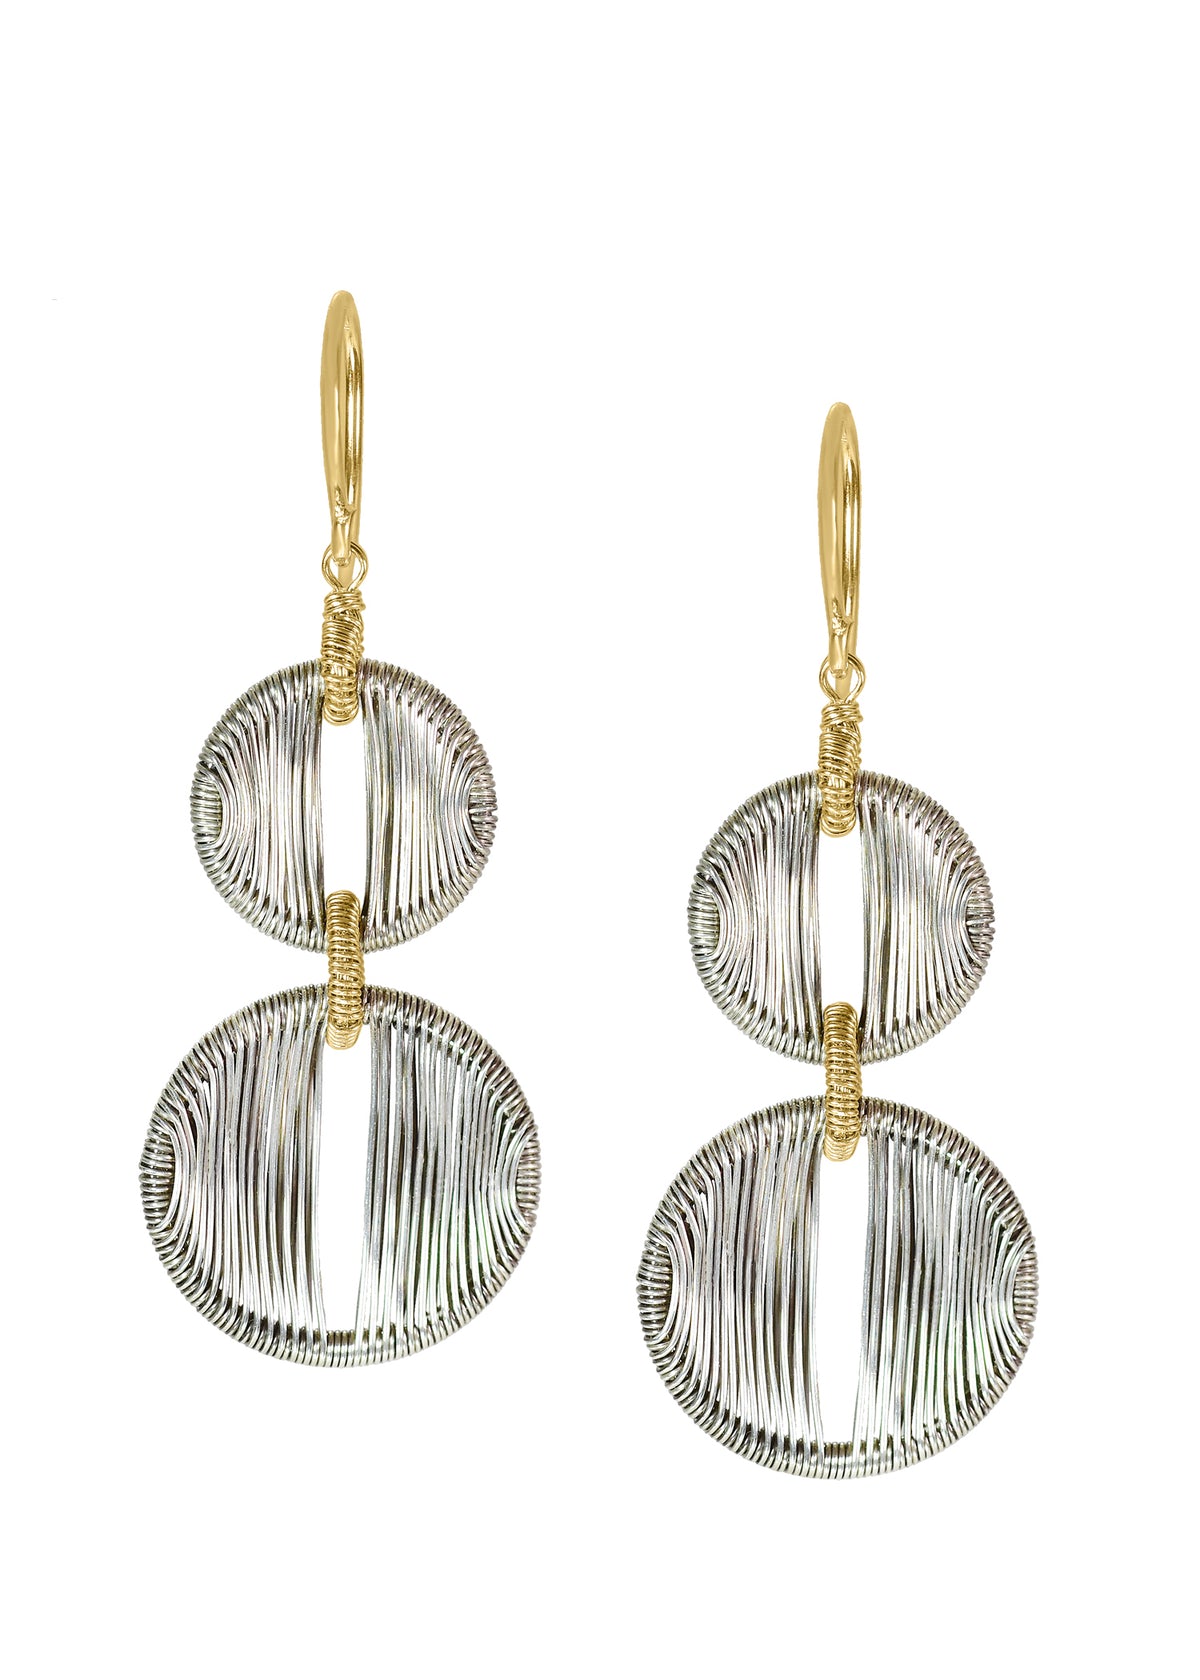 14k gold fill Sterling silver Mixed metal Earrings measure 1-11/16&quot; in length (including the ear wires) Top drop diameter is 7/16&quot;, bottom drop diameter is 5/8 Handmade in our Los Angeles studio